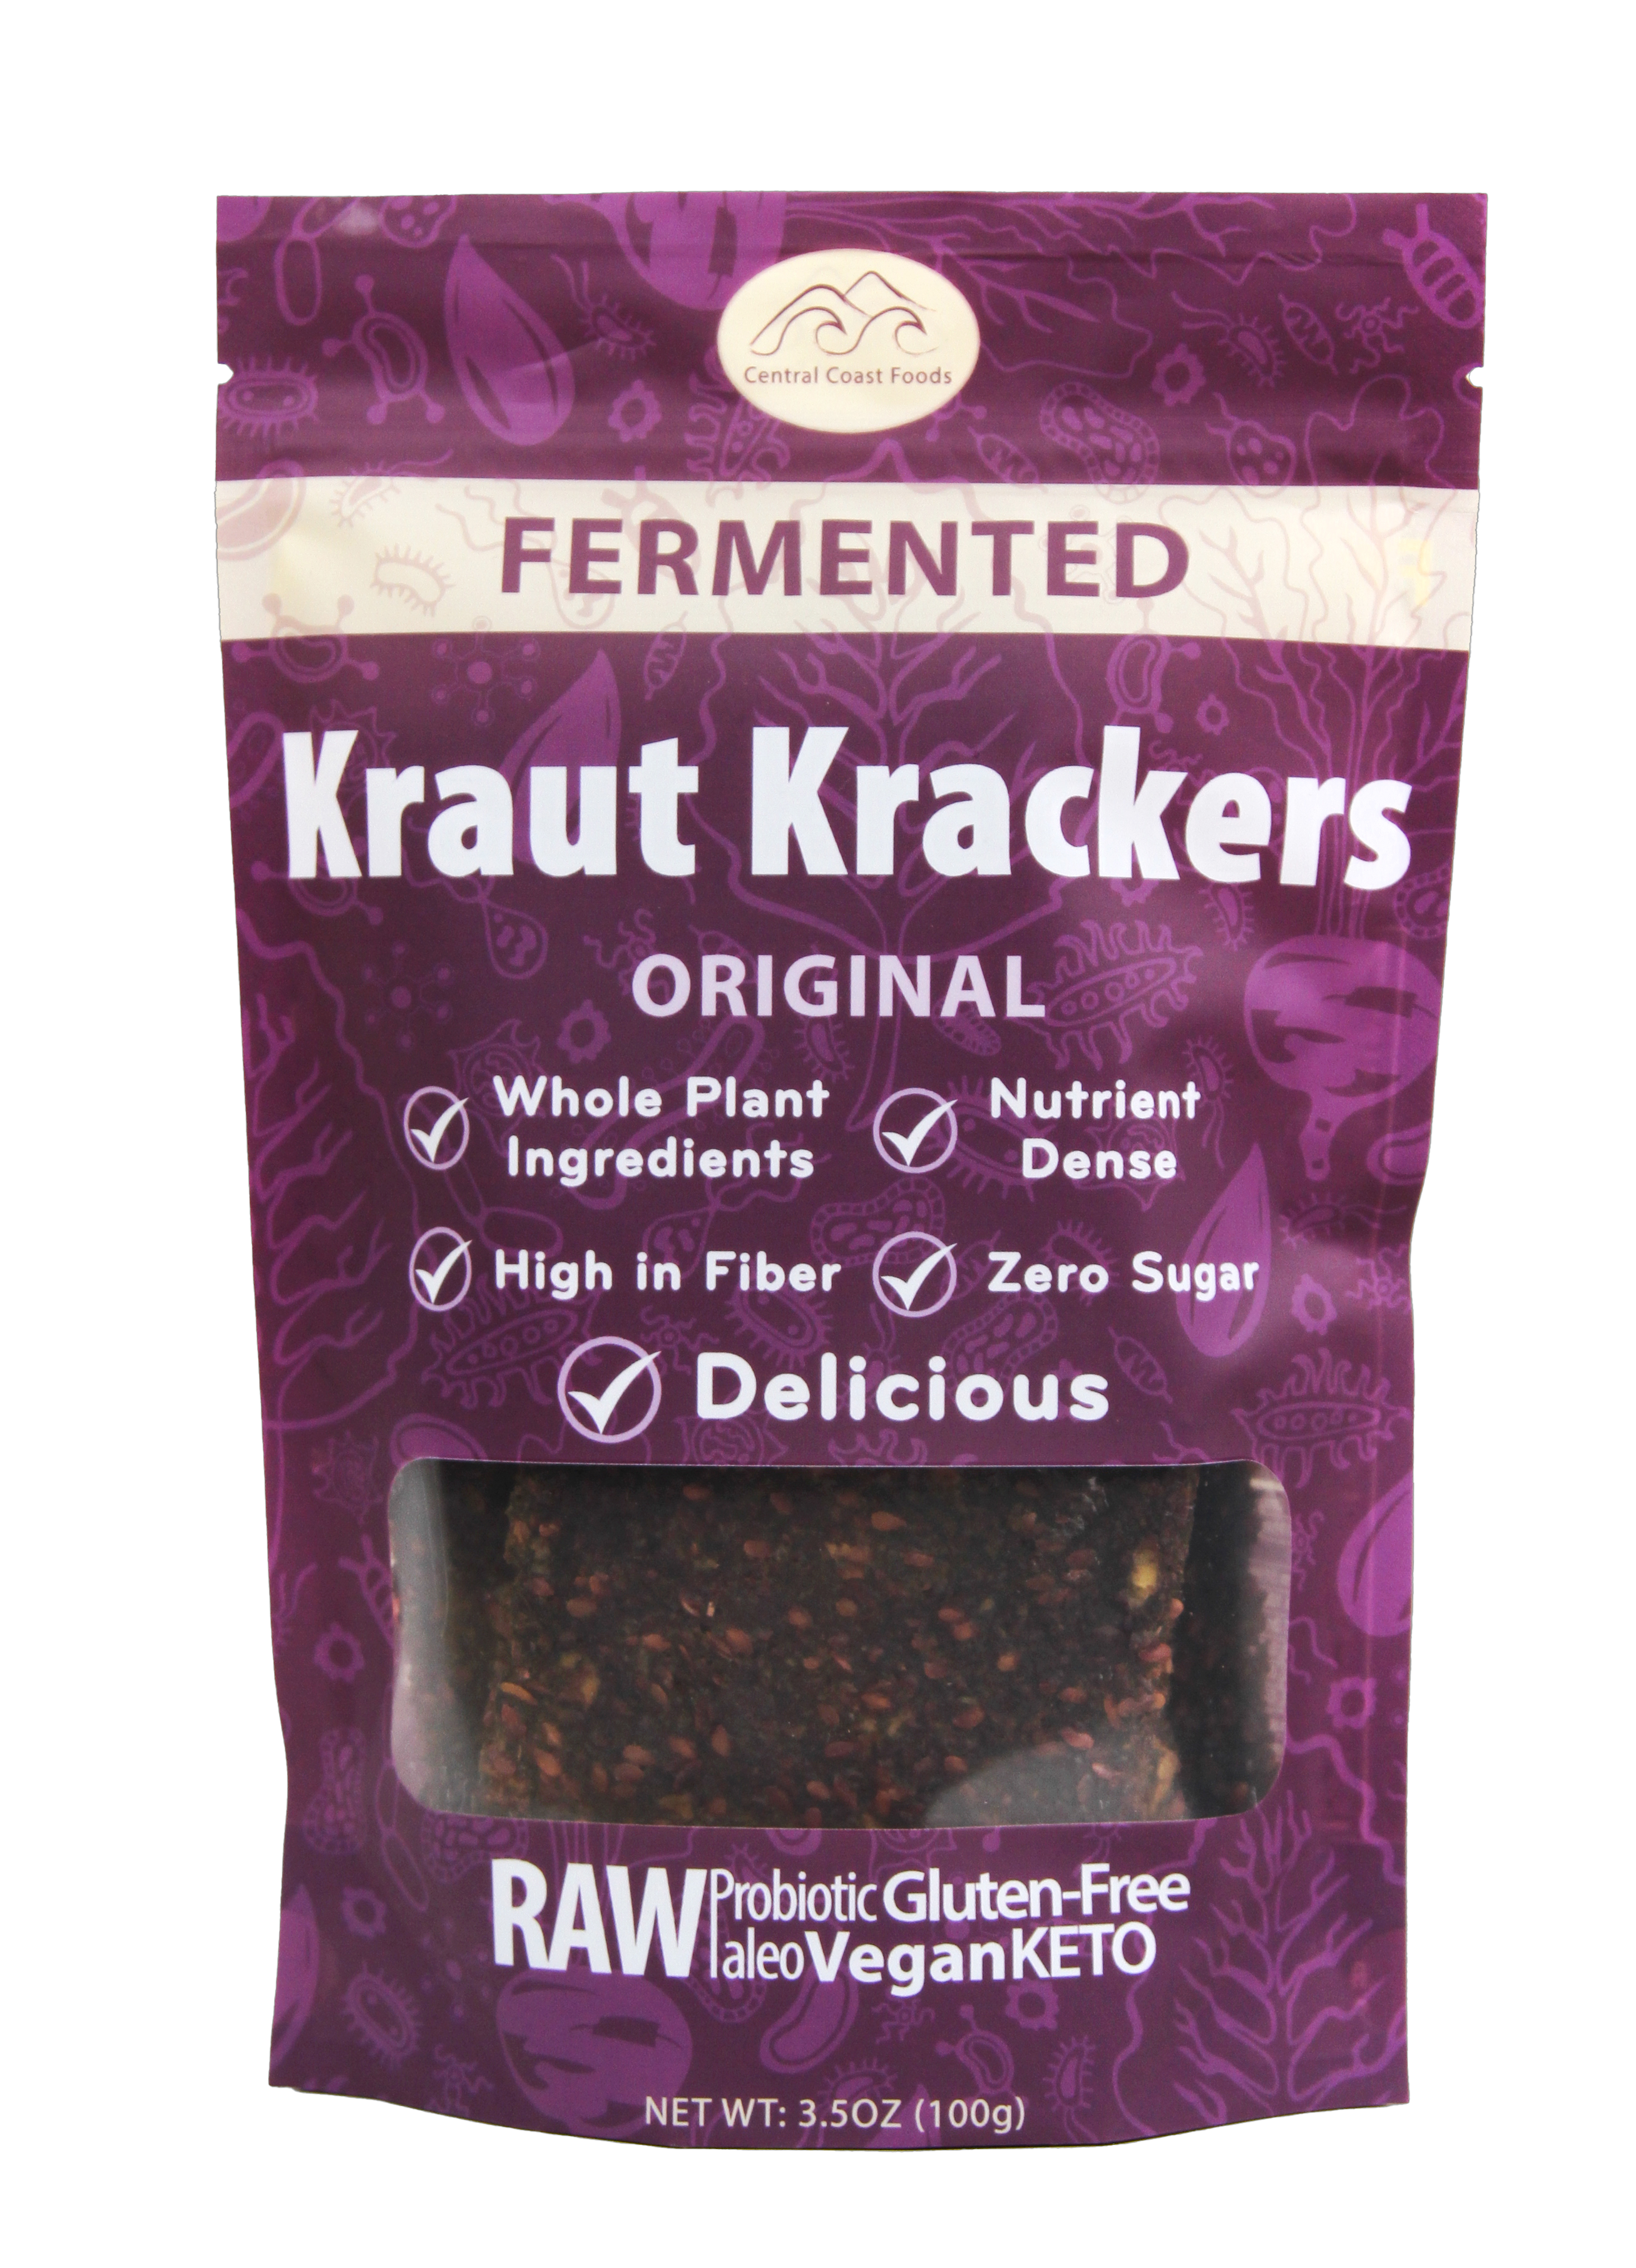 Front photo of a bag of Kraut Krackers